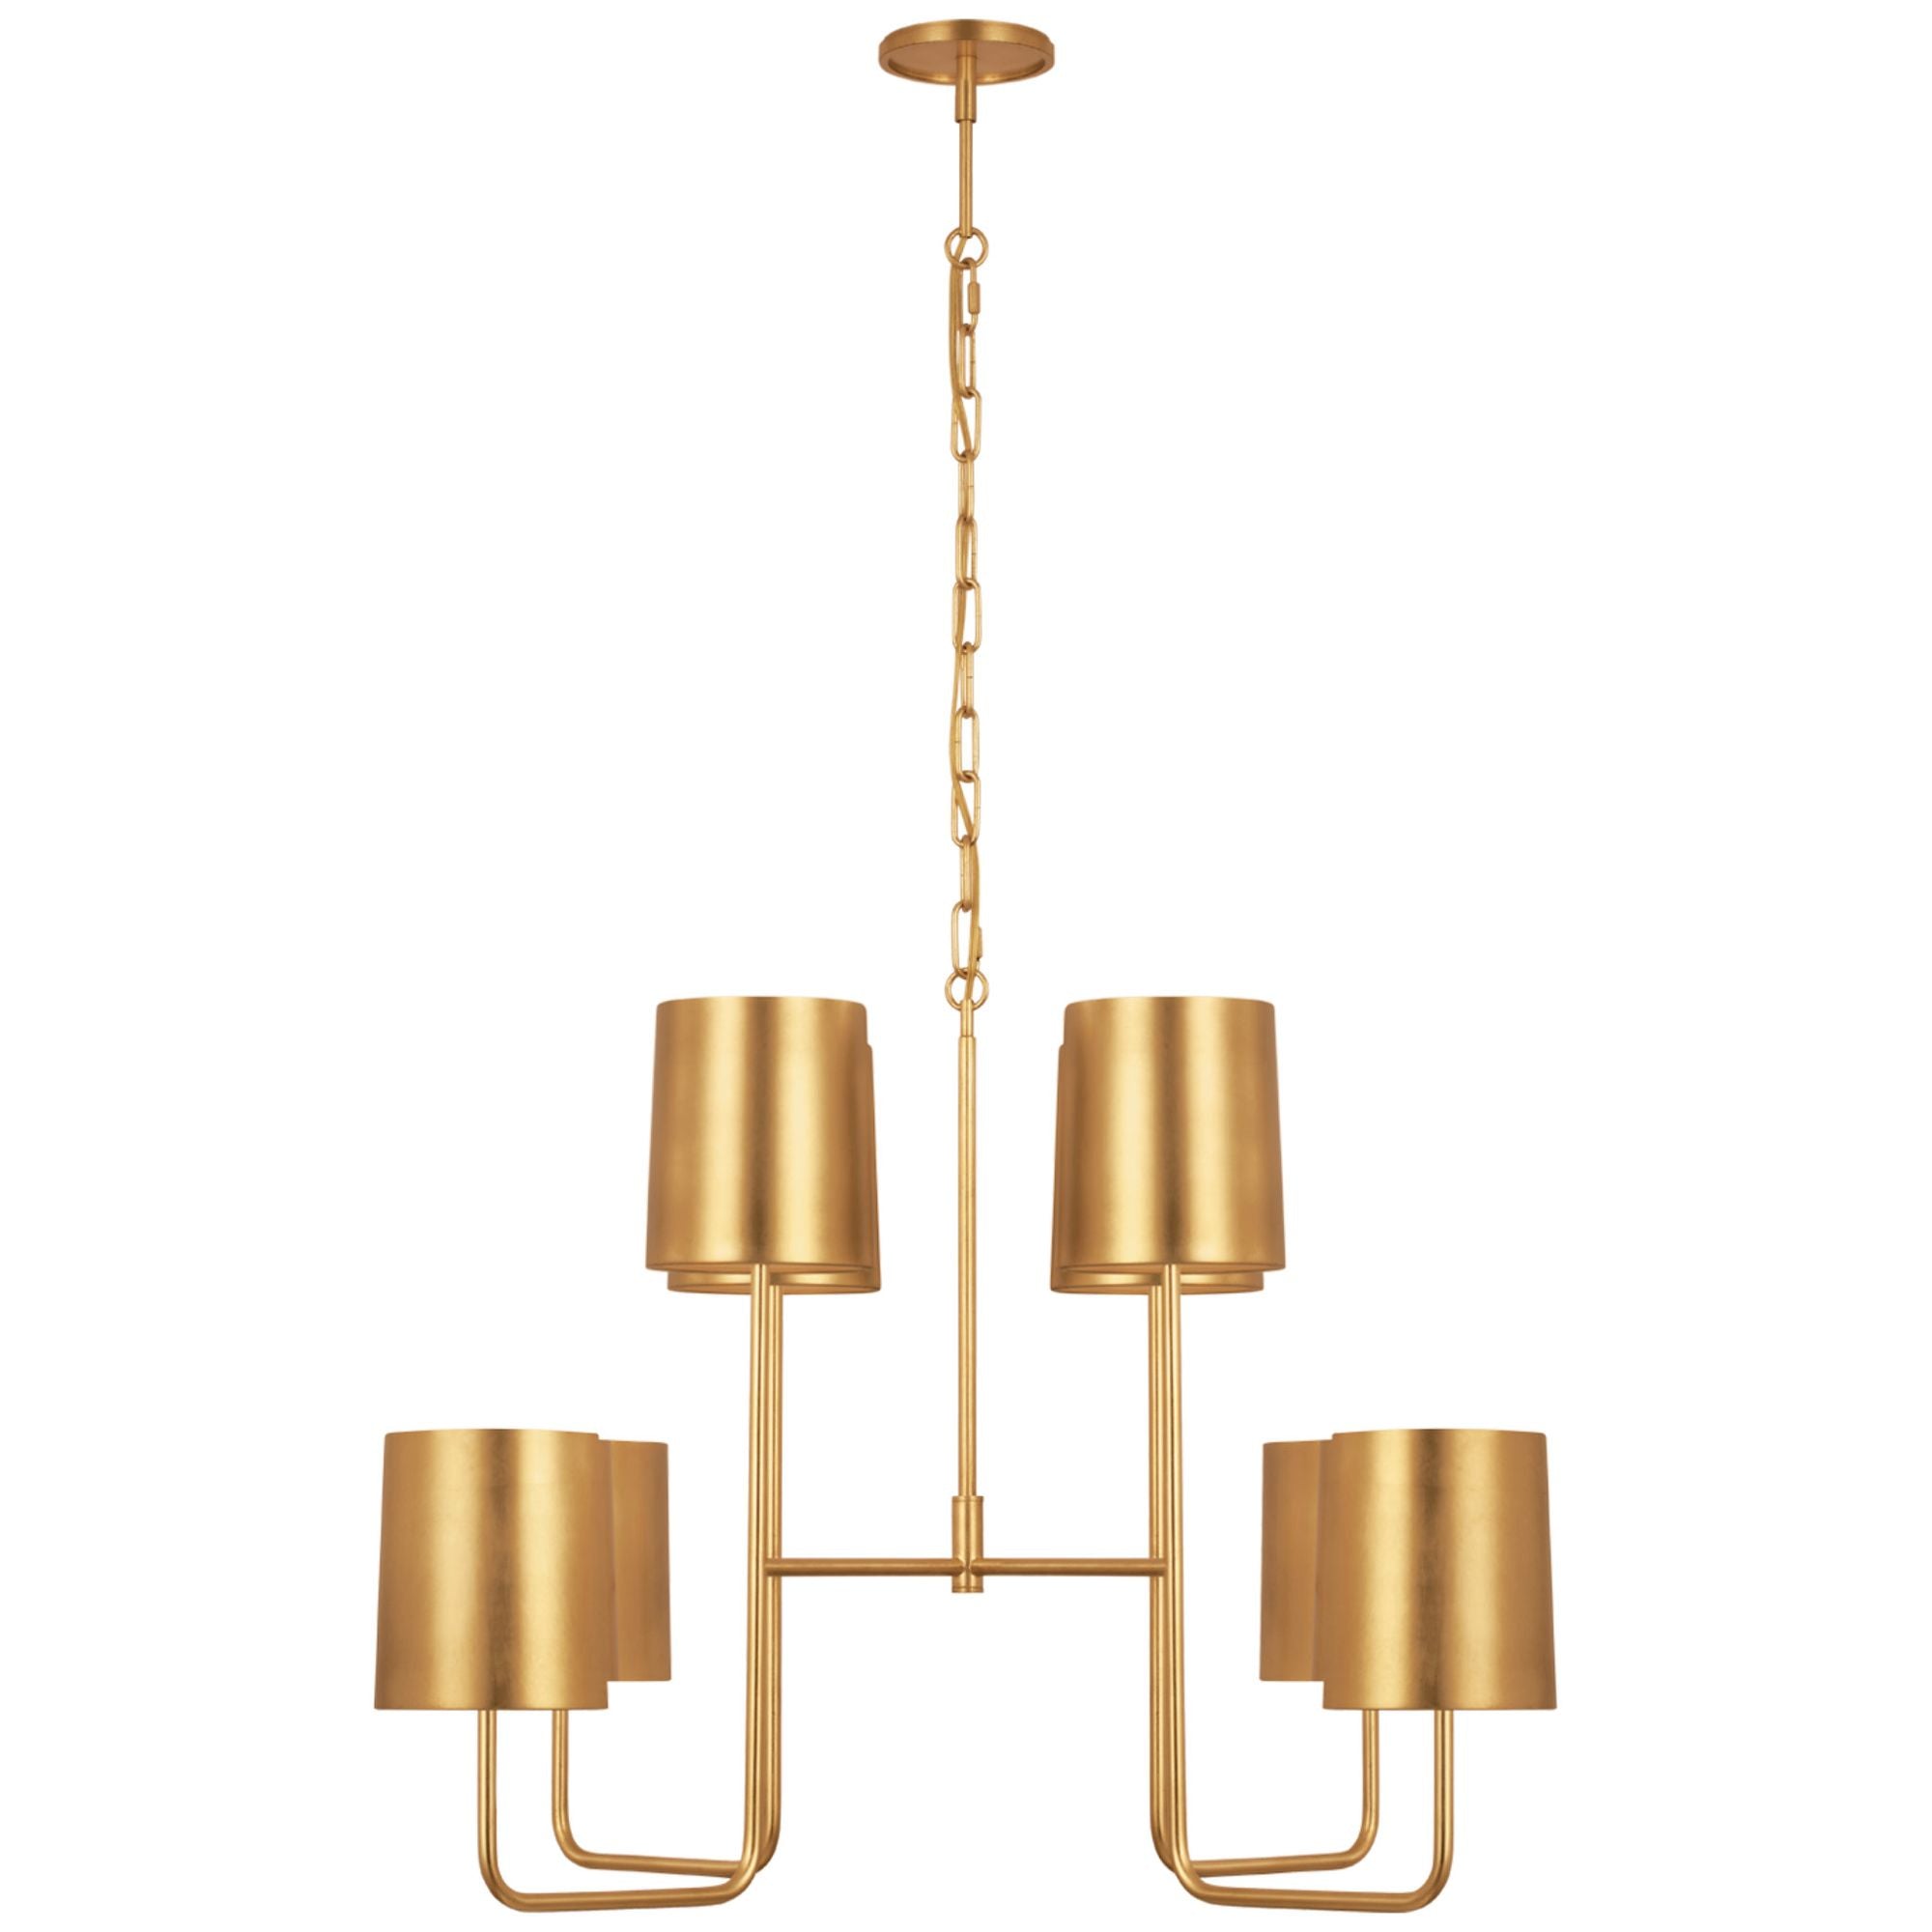 Barbara Barry Go Lightly Extra Large Two Tier Chandelier in Gild with Gild Shades